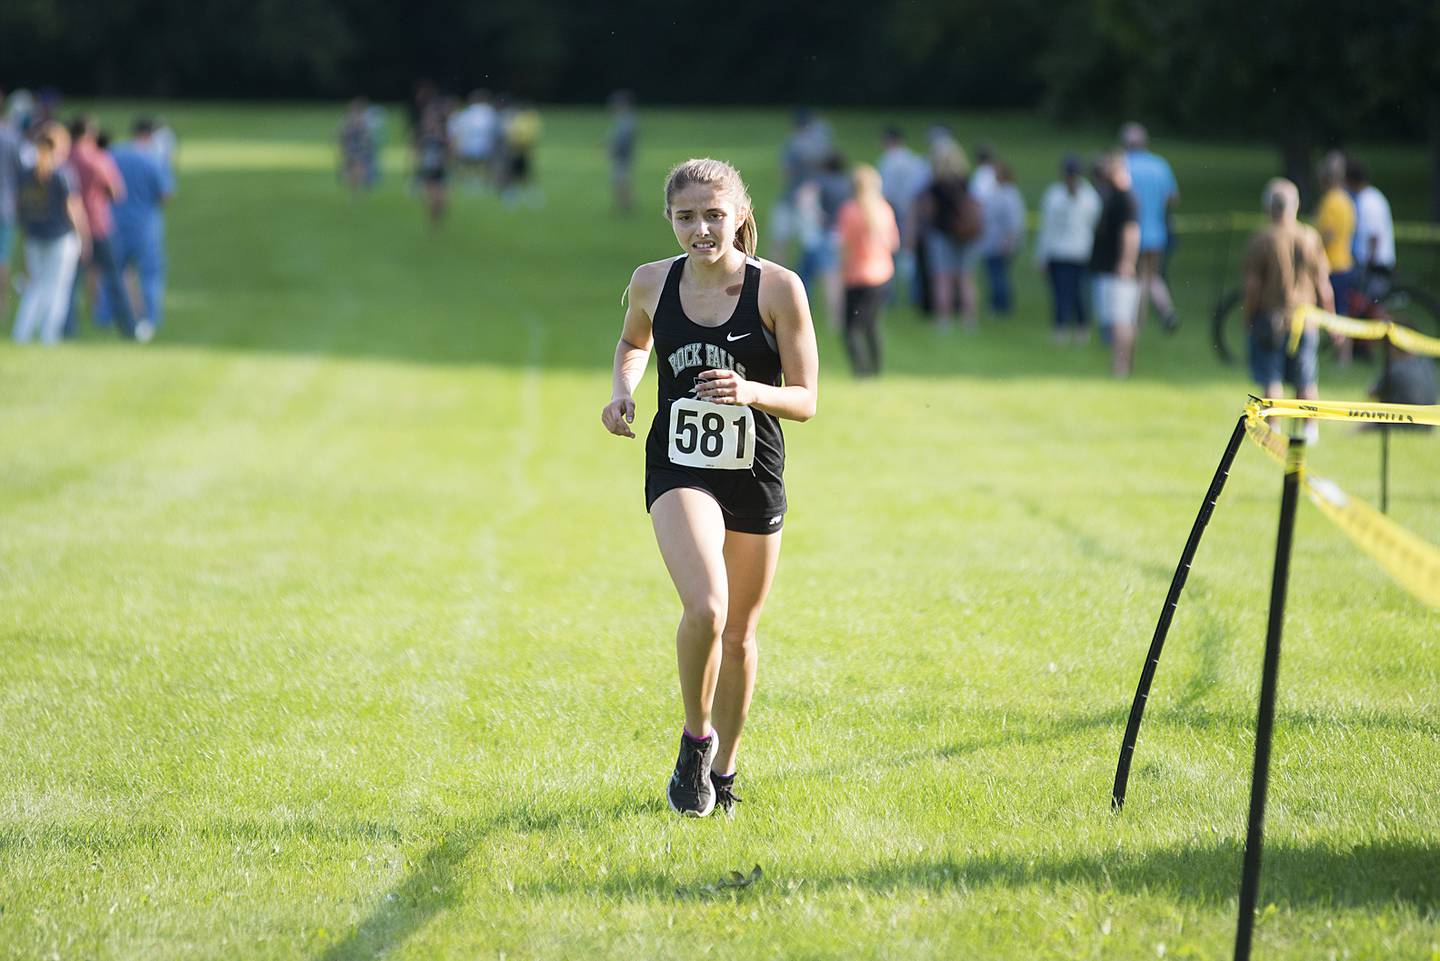 Rock Falls' Hanna Ford eyes the finish line for second place at the Twin Cities cross country meet in Sterling, Sept. 13, 2022.